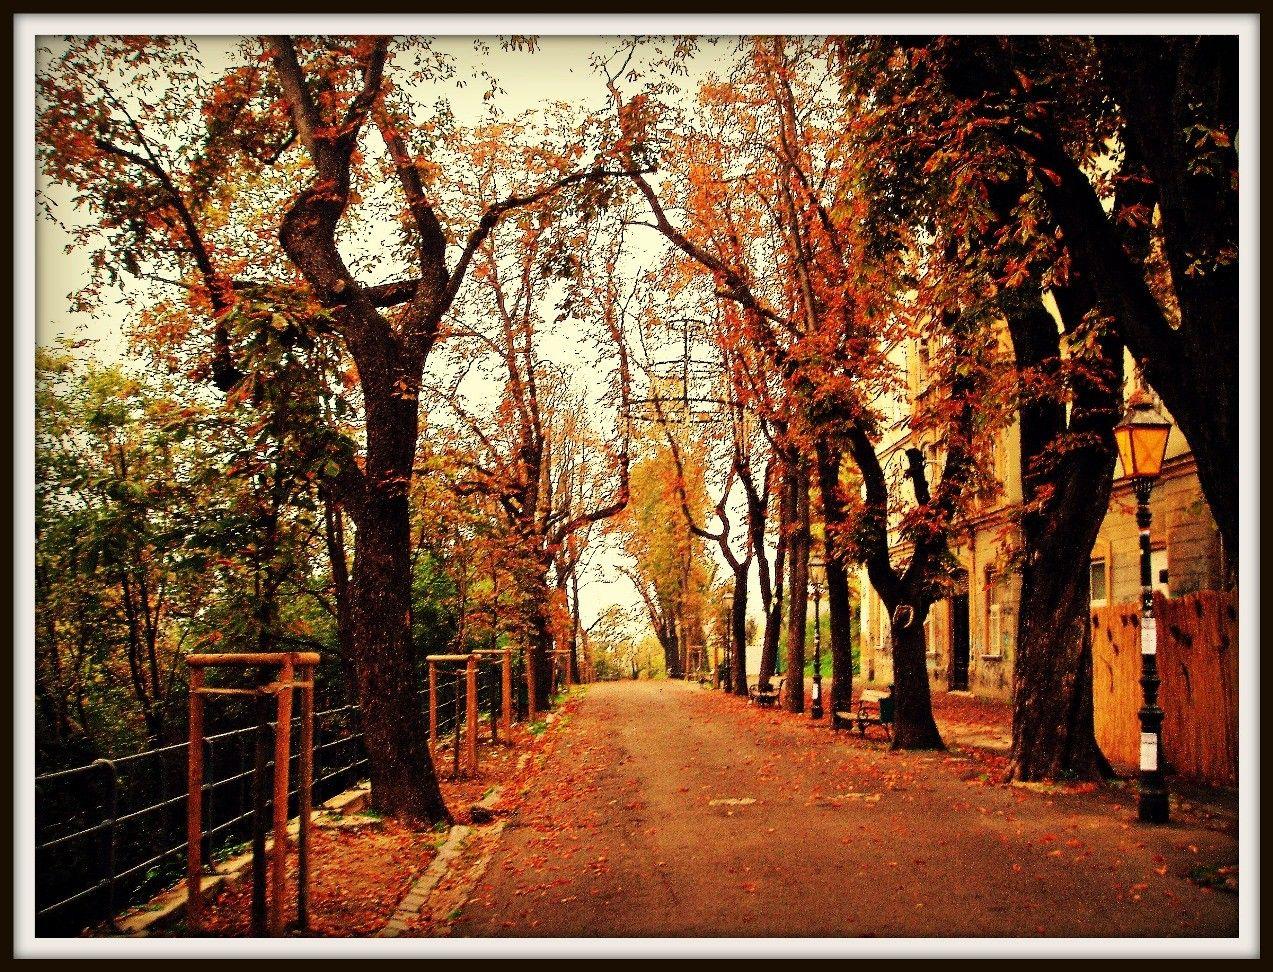 Other: Zagreb Autumn Path Street Croatia Golden Leaves Trees Dual